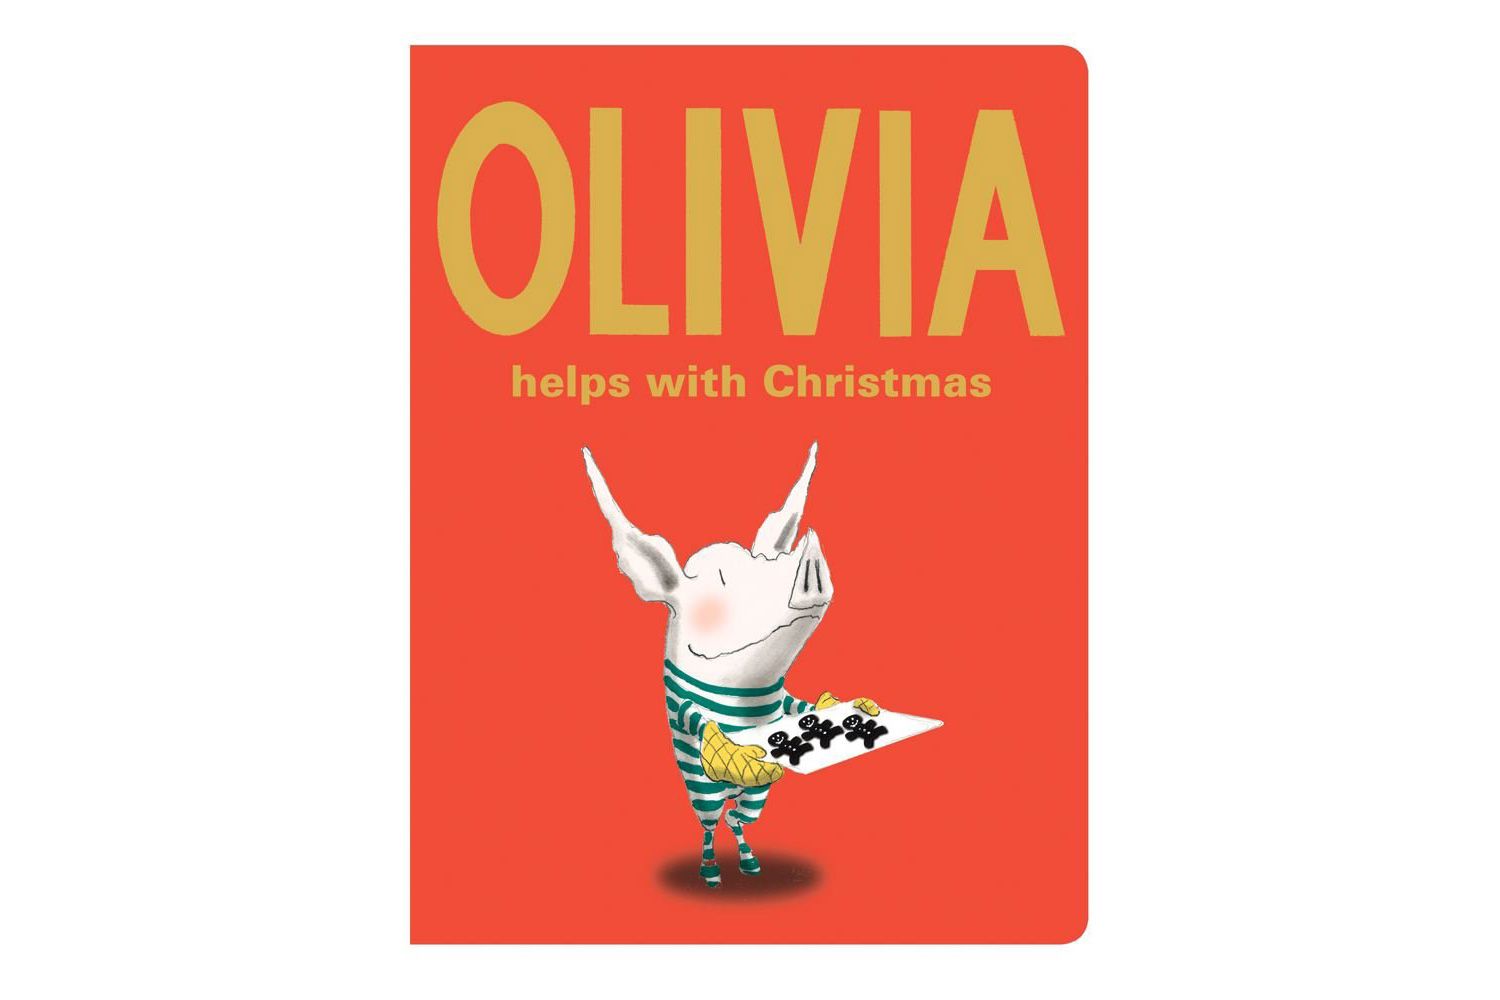 Olivia Helps with Christmas, by Ian Falconer